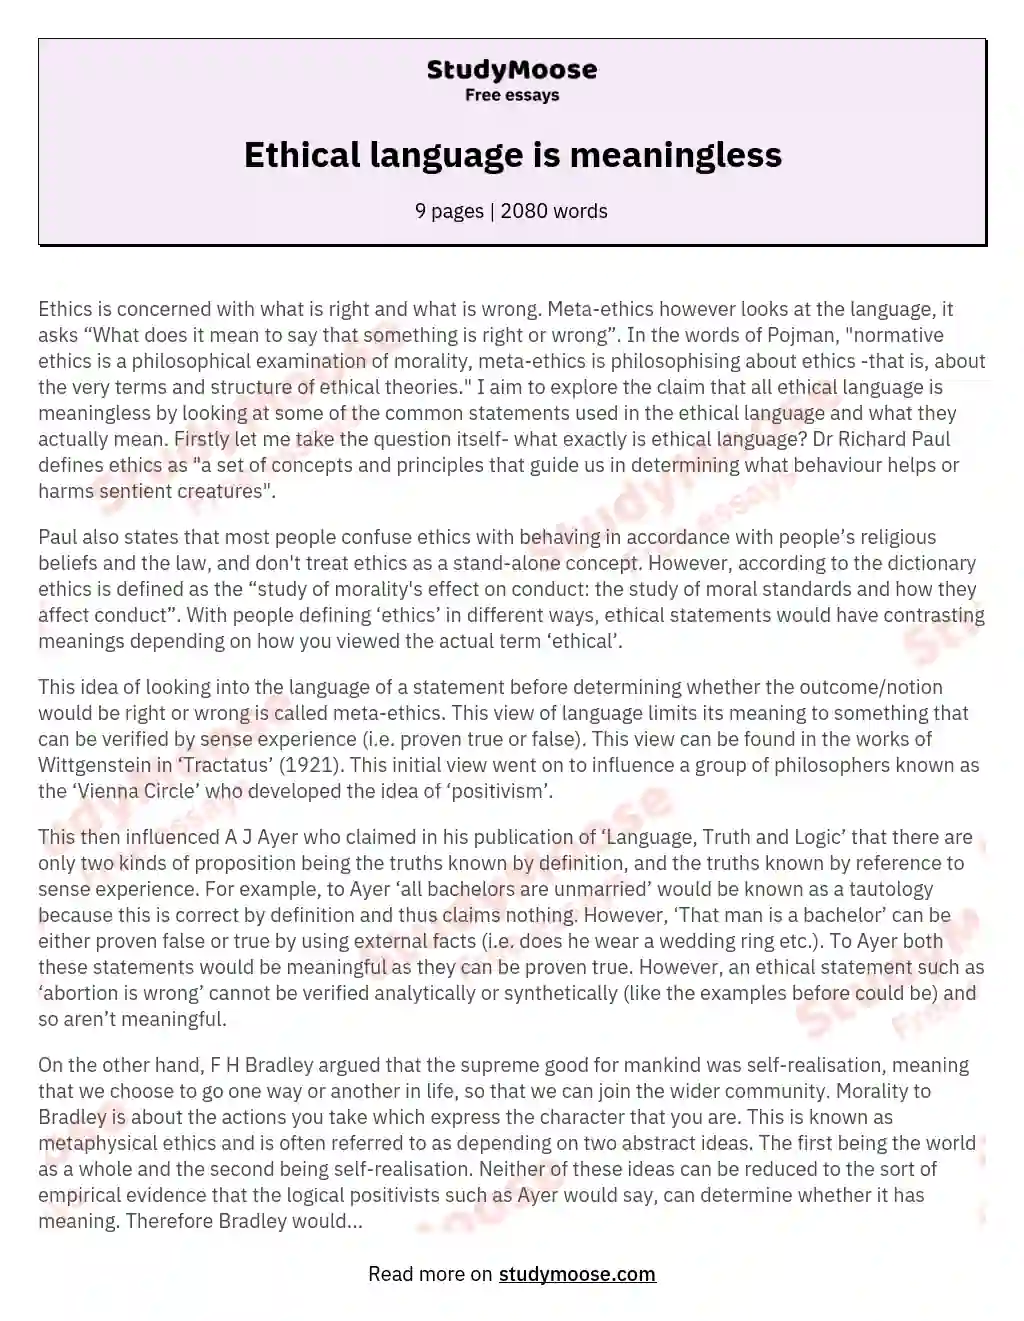 Ethical language is meaningless essay